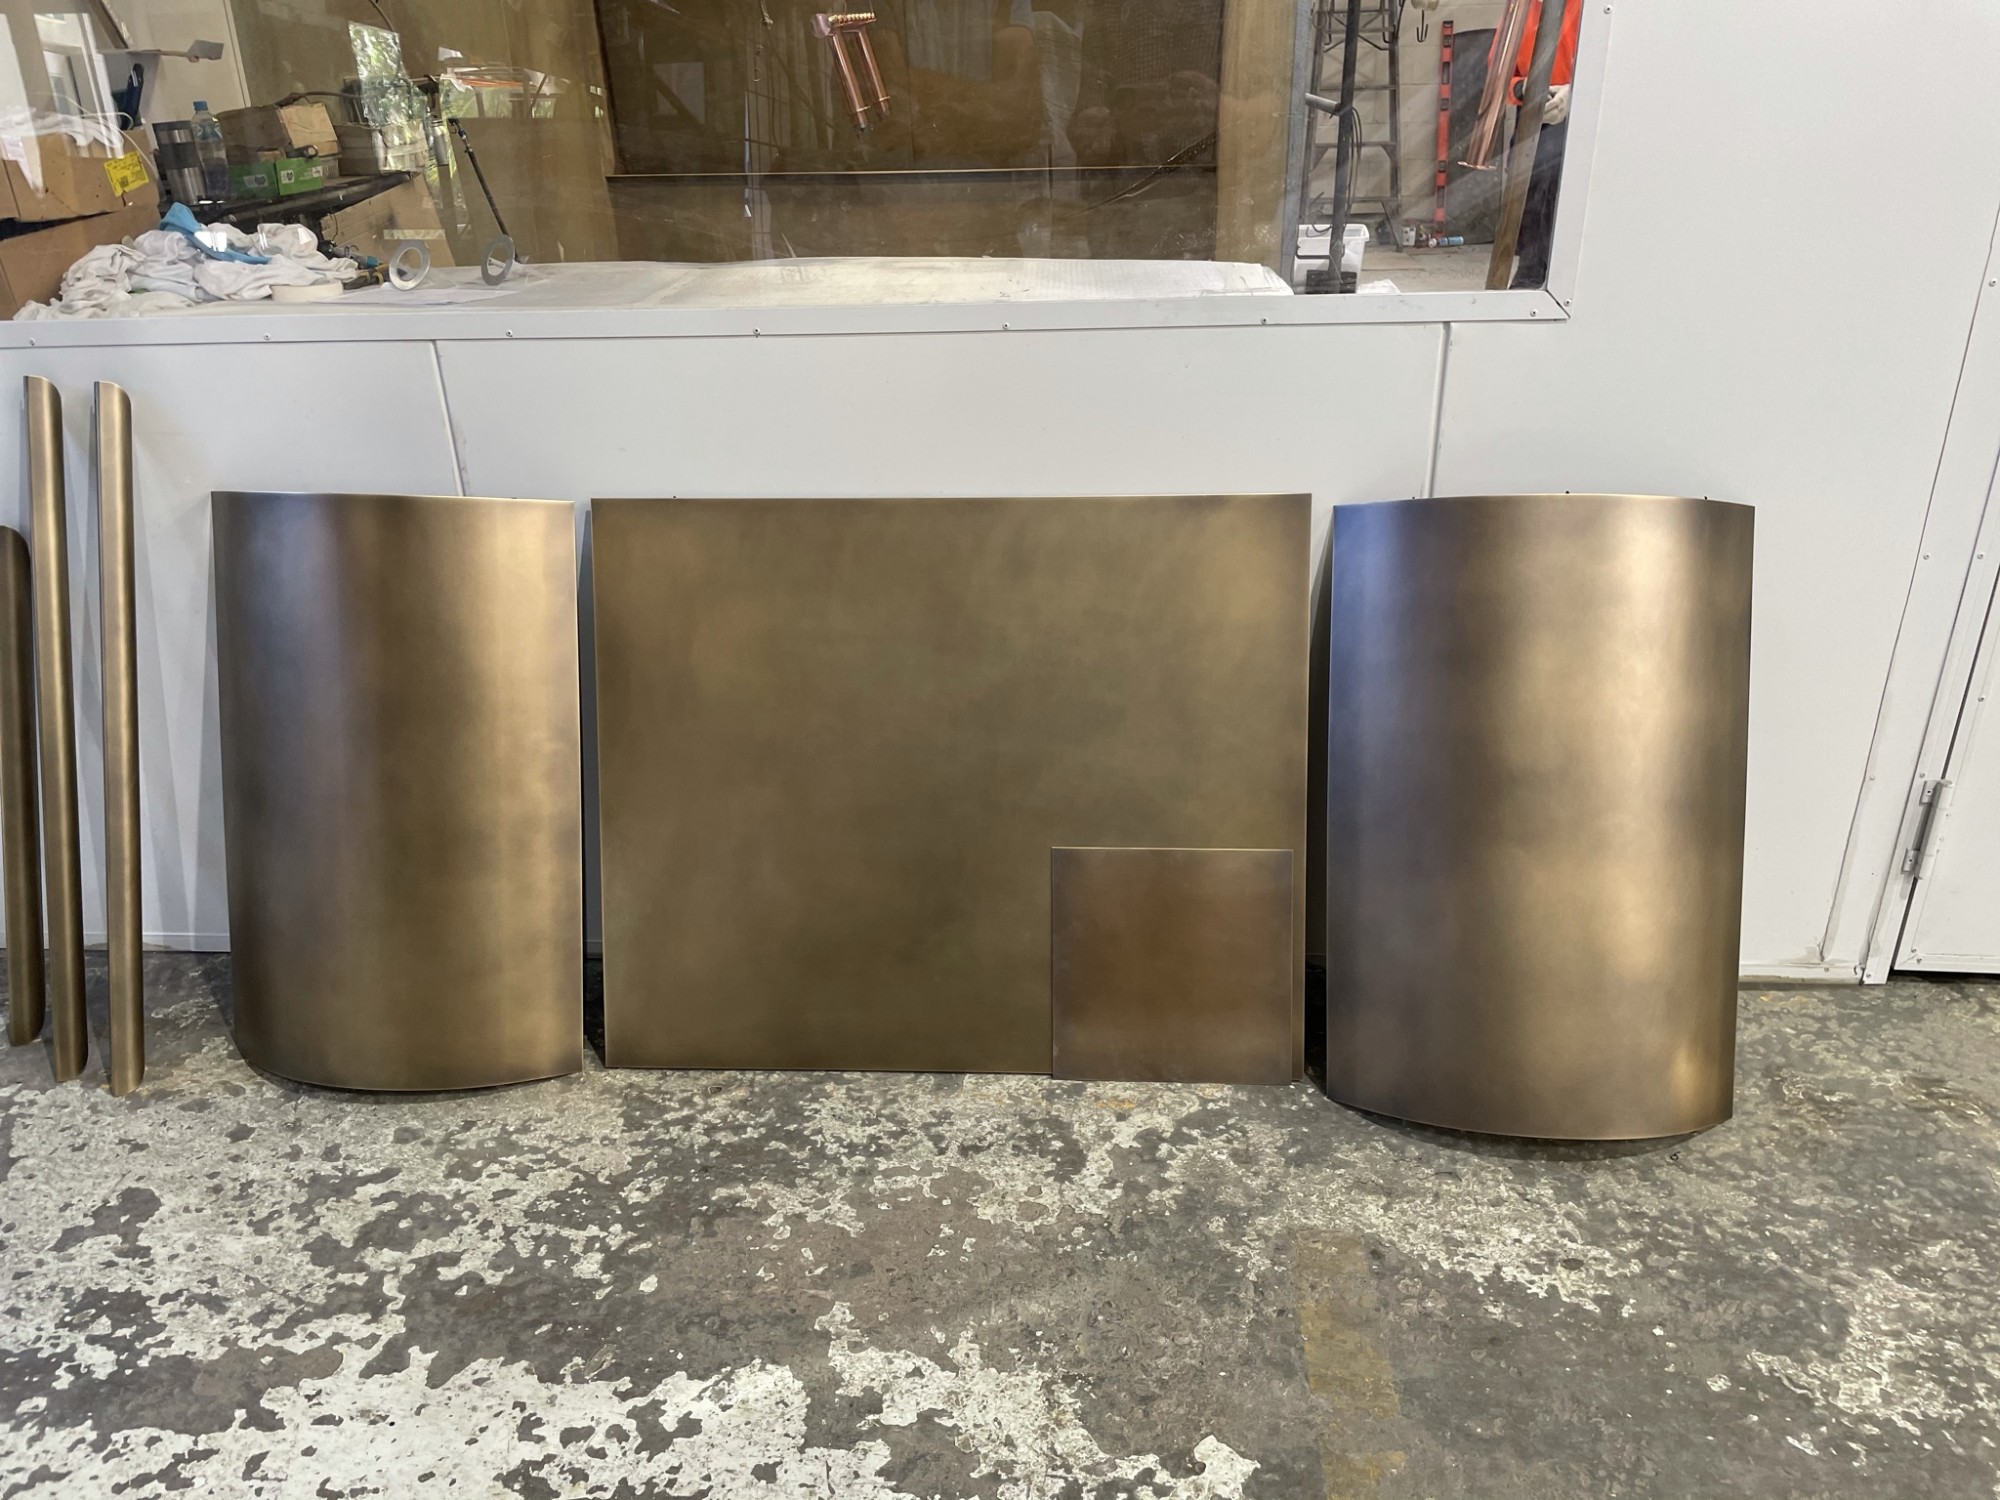 3 pcs rangehood set for MIRVAC - FINISHED in TUCANA Lightly Aged Brass + Clear Satin 